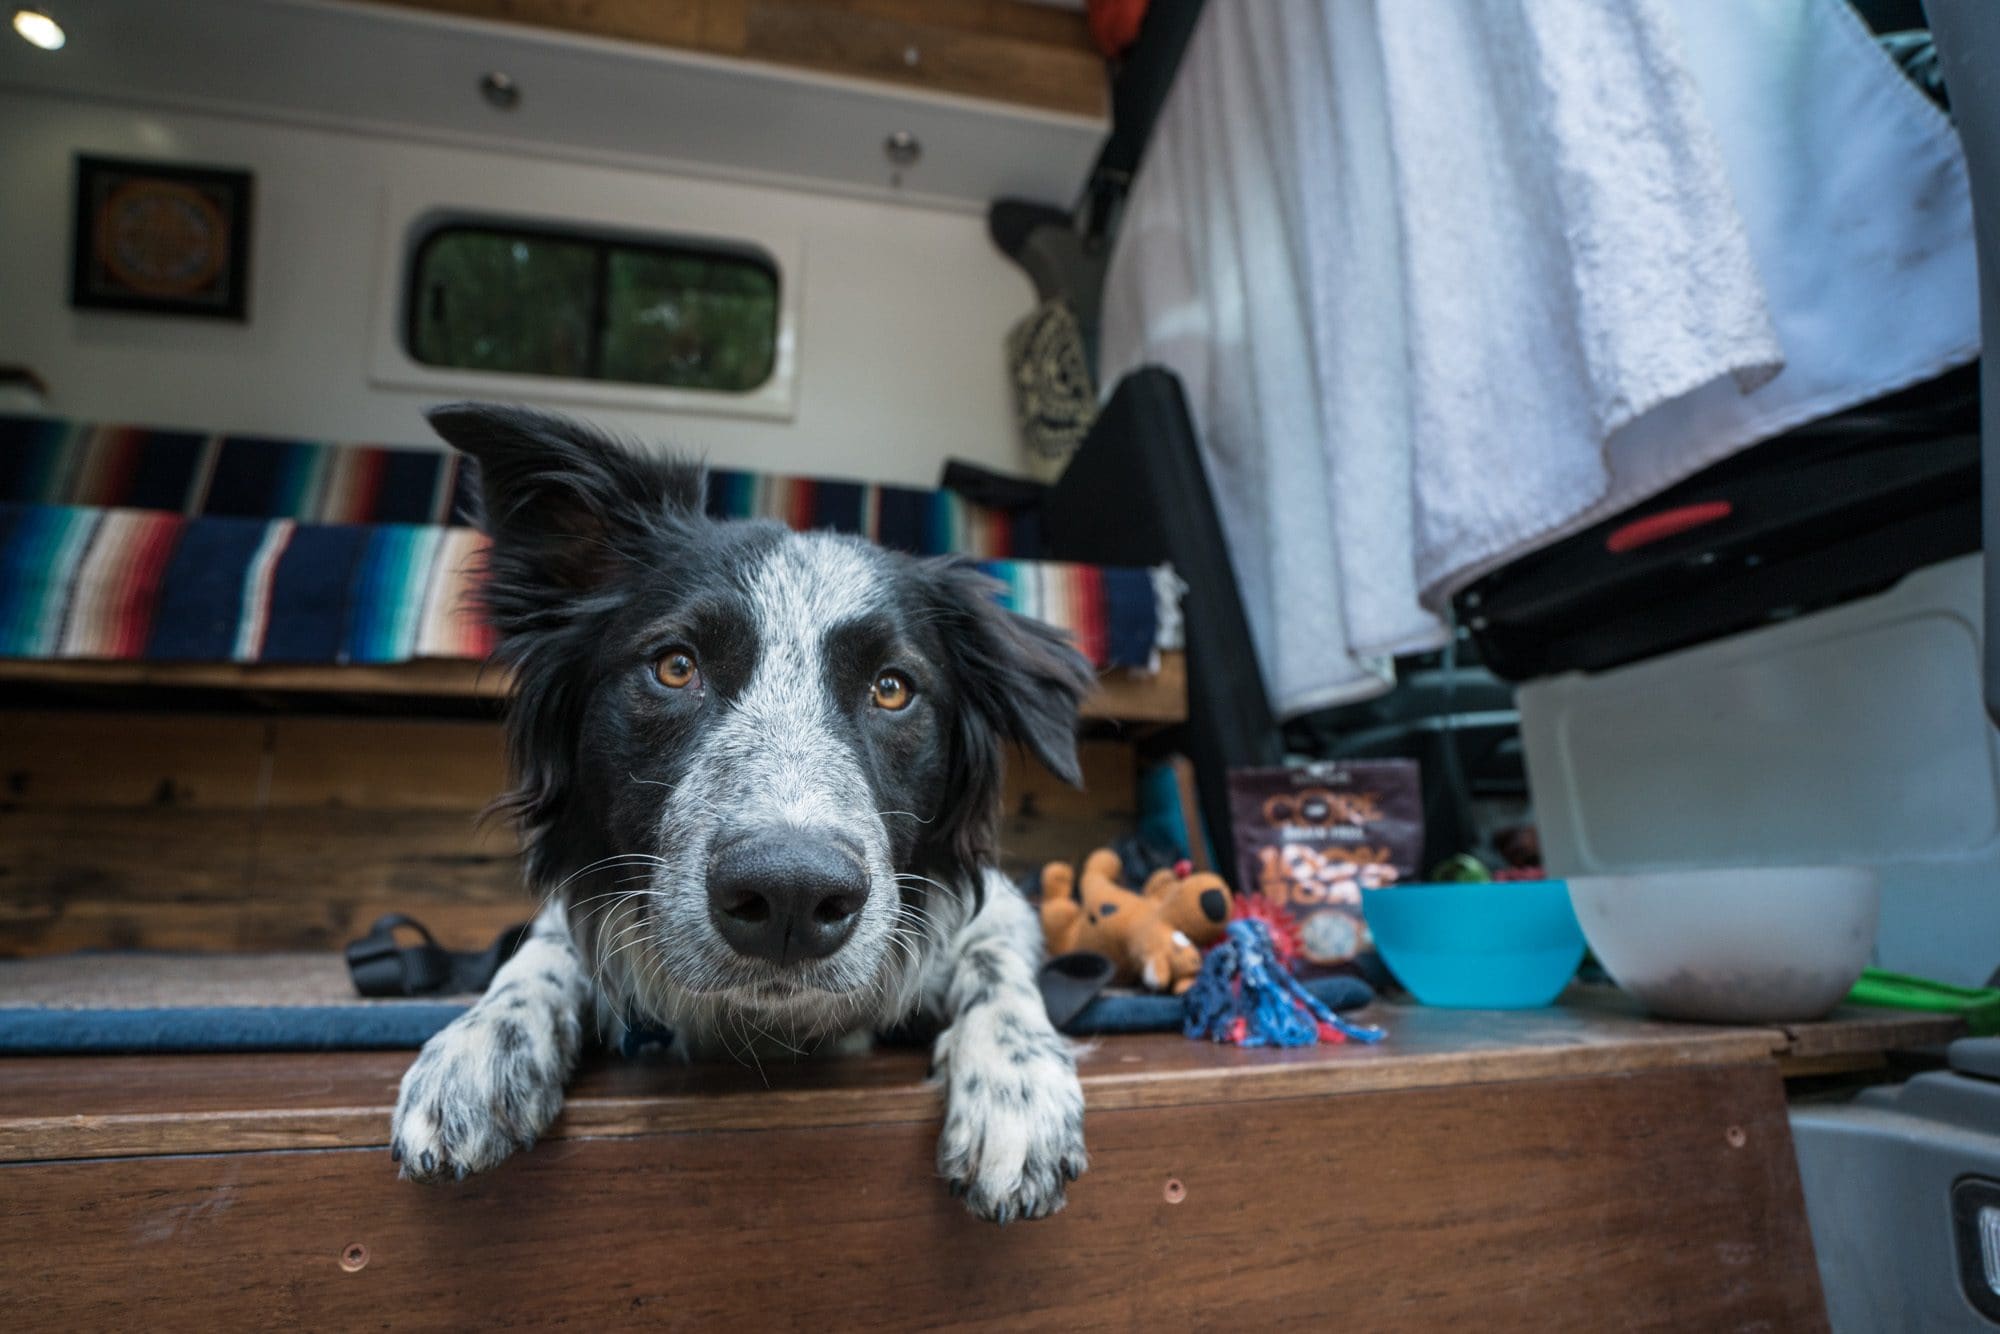 Charlie in the van // Get 15 practical tips for road trips with your dog, including training & ideas for keeping your dog exercised & entertained on the road.